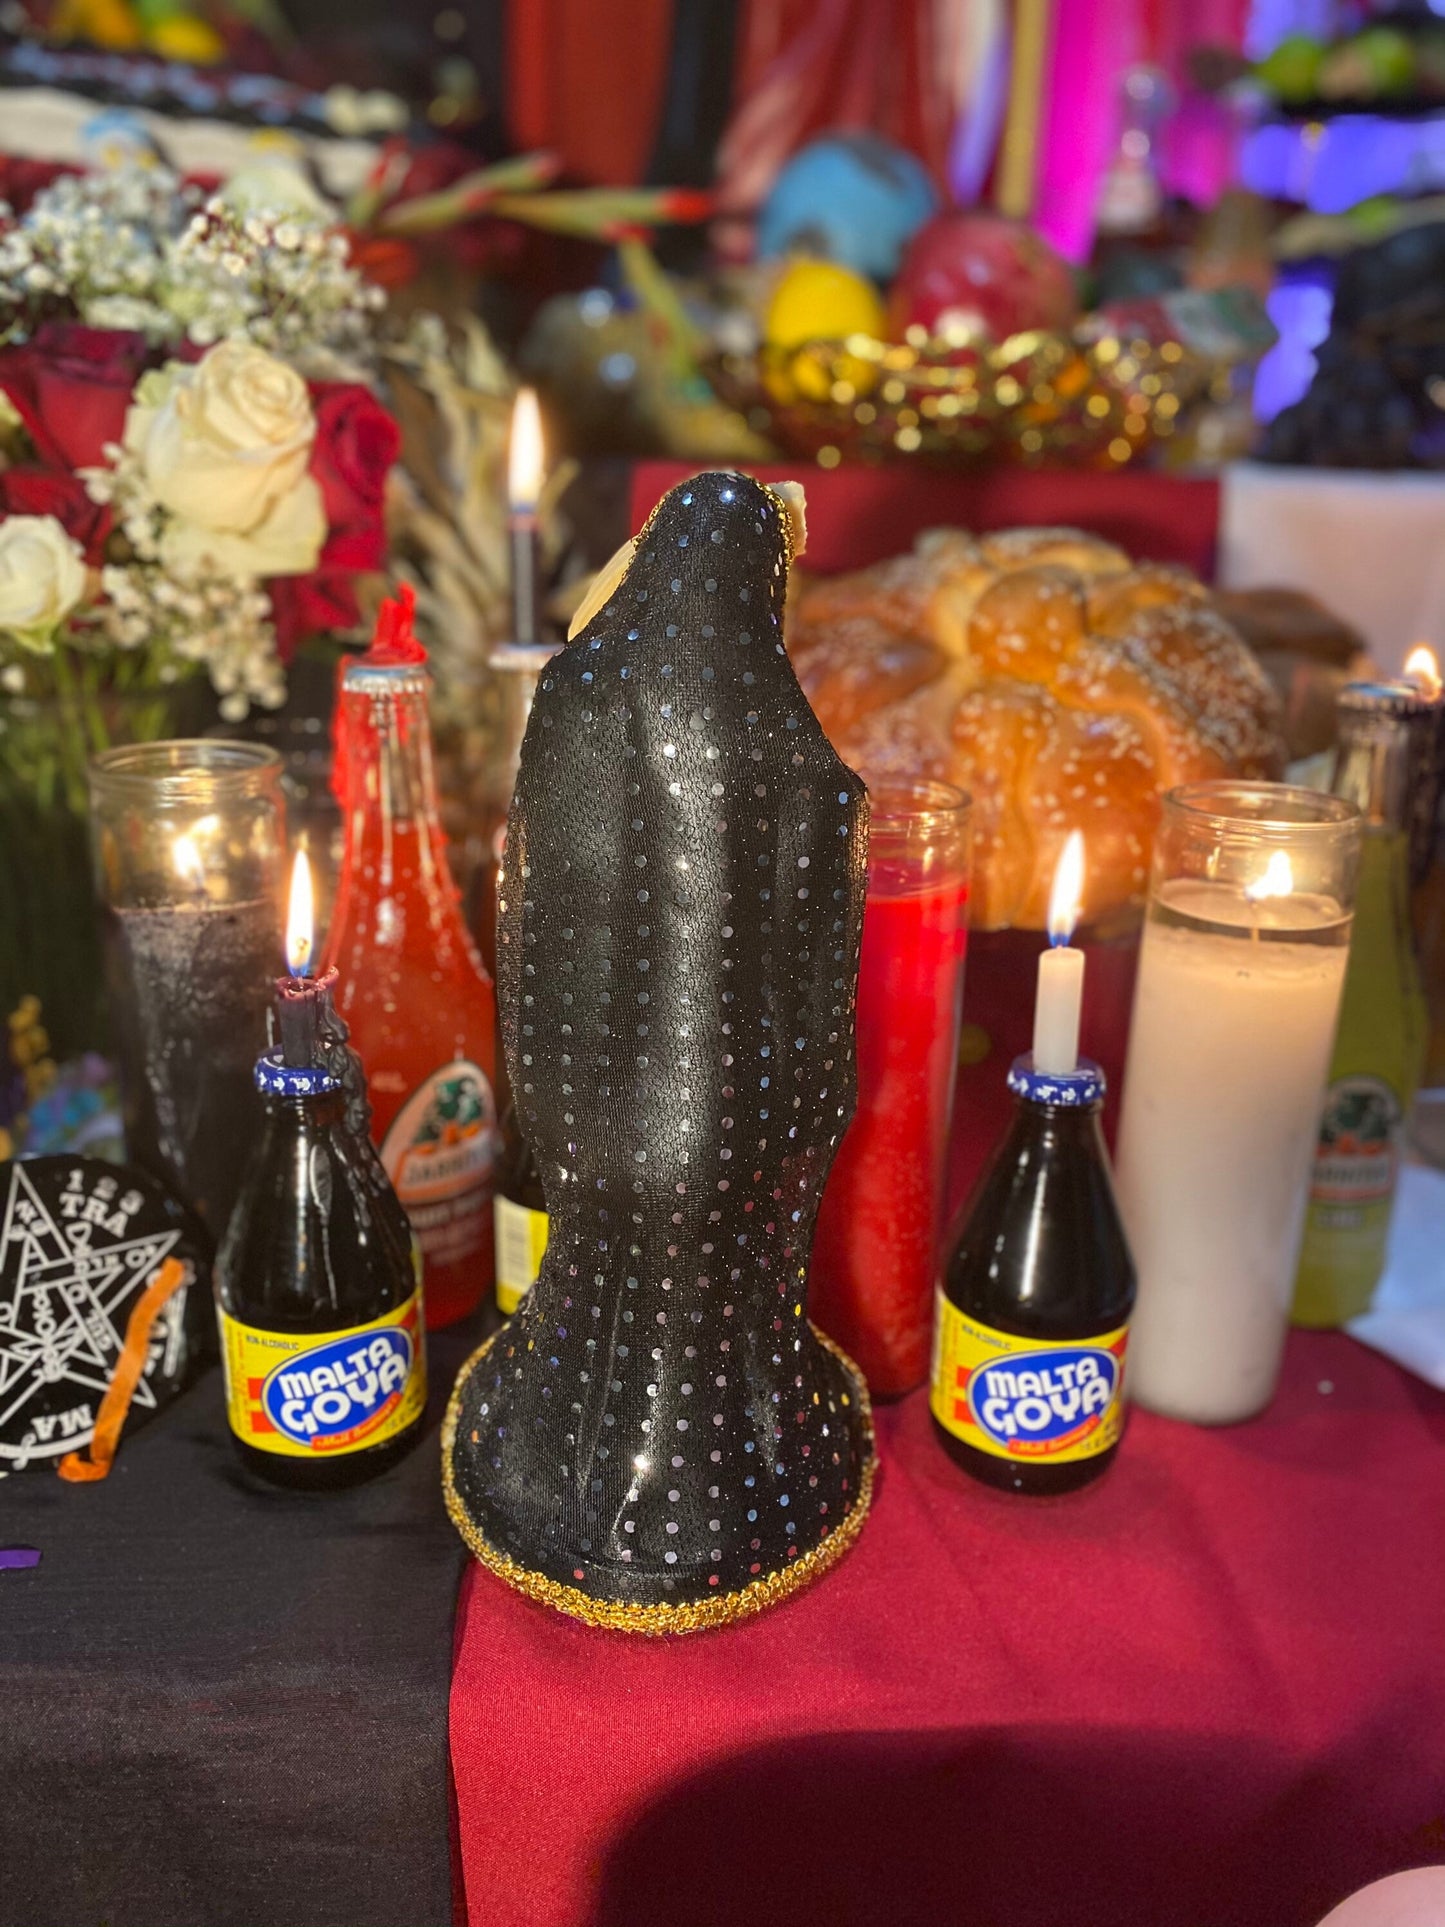 Santa Muerte Negra Statue + 12” + Fixed and Baptized on Feast Day + Protection + Binding + 24K Gold